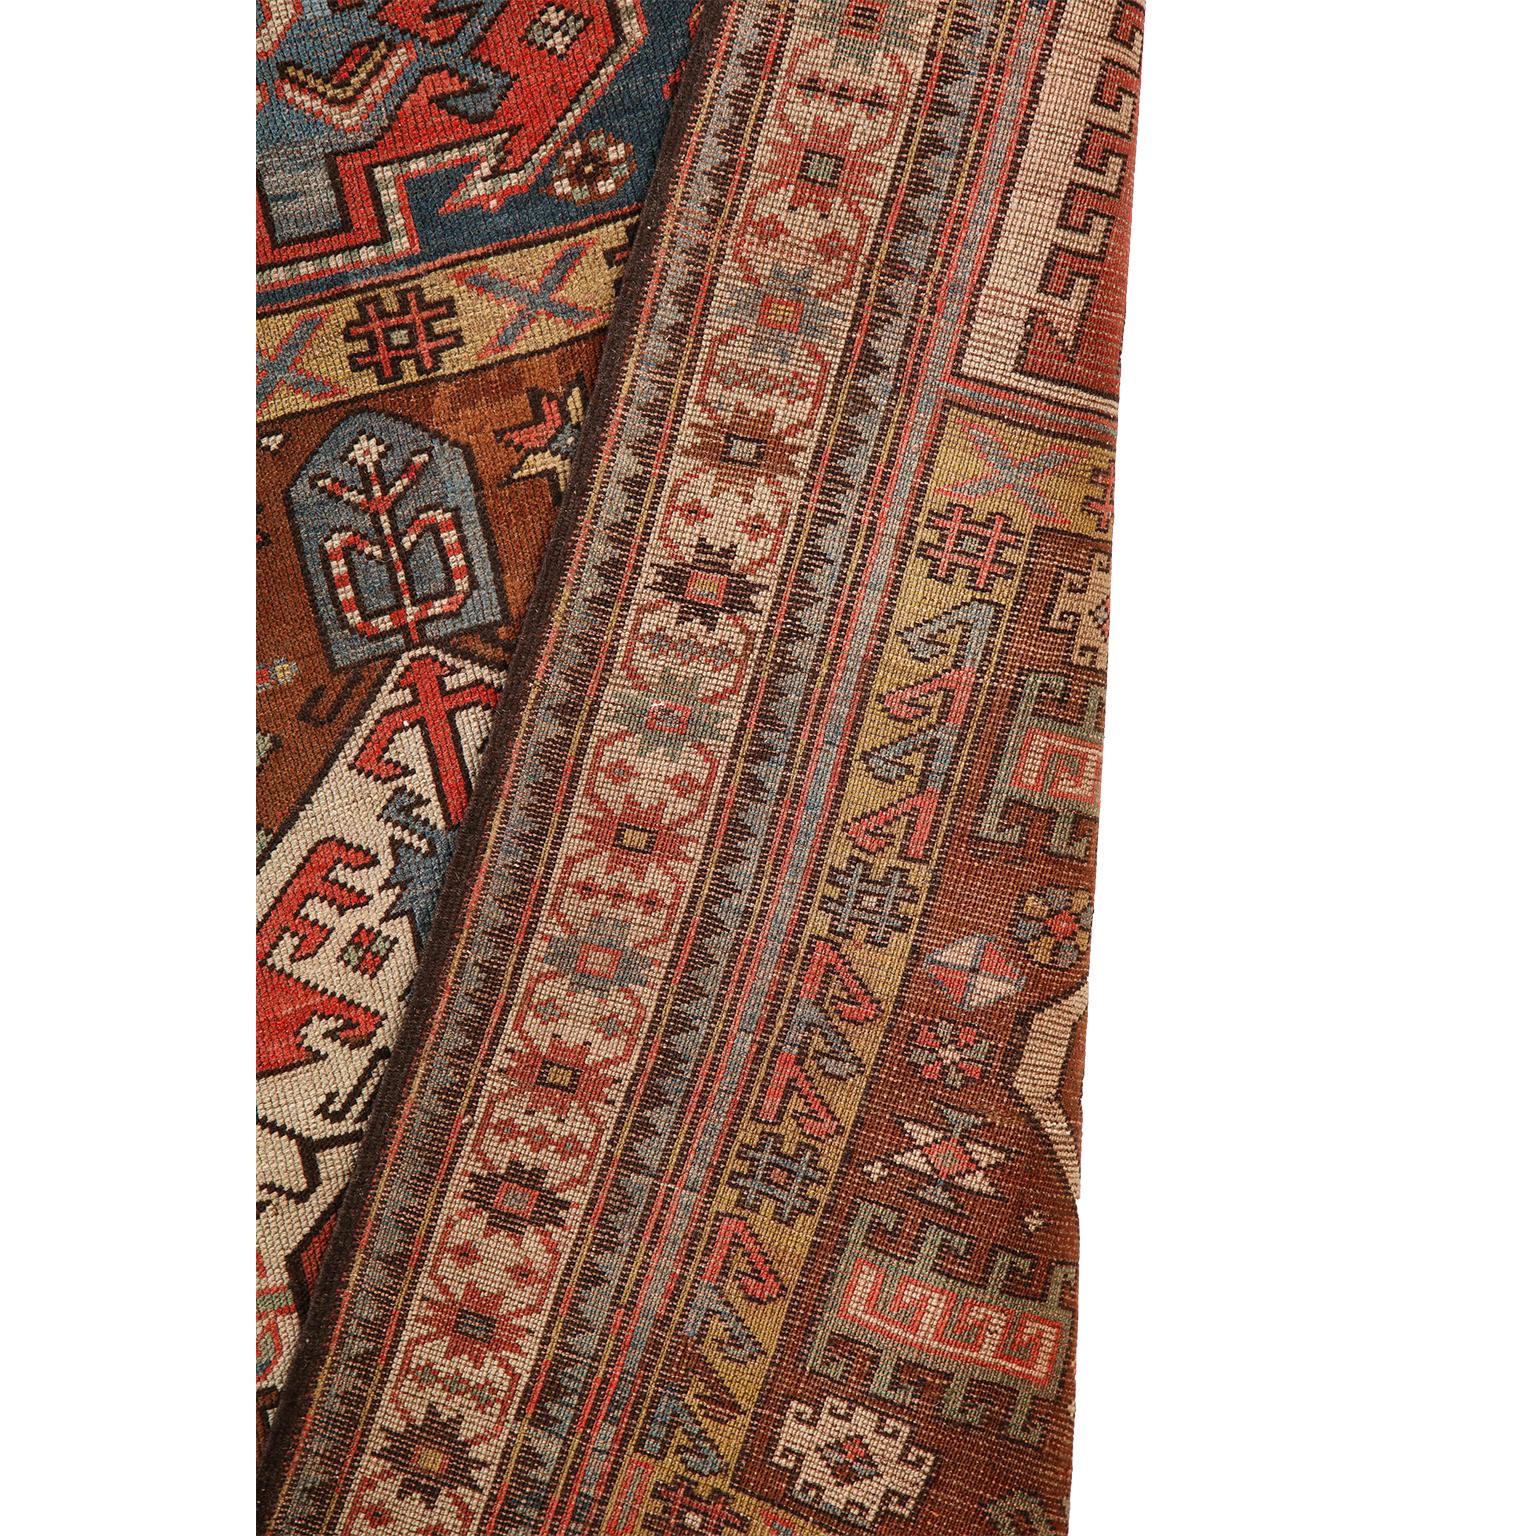 Antique 1880s Caucasian Rug, Wool, Blue, Green, Red, 4' x 6' For Sale 6